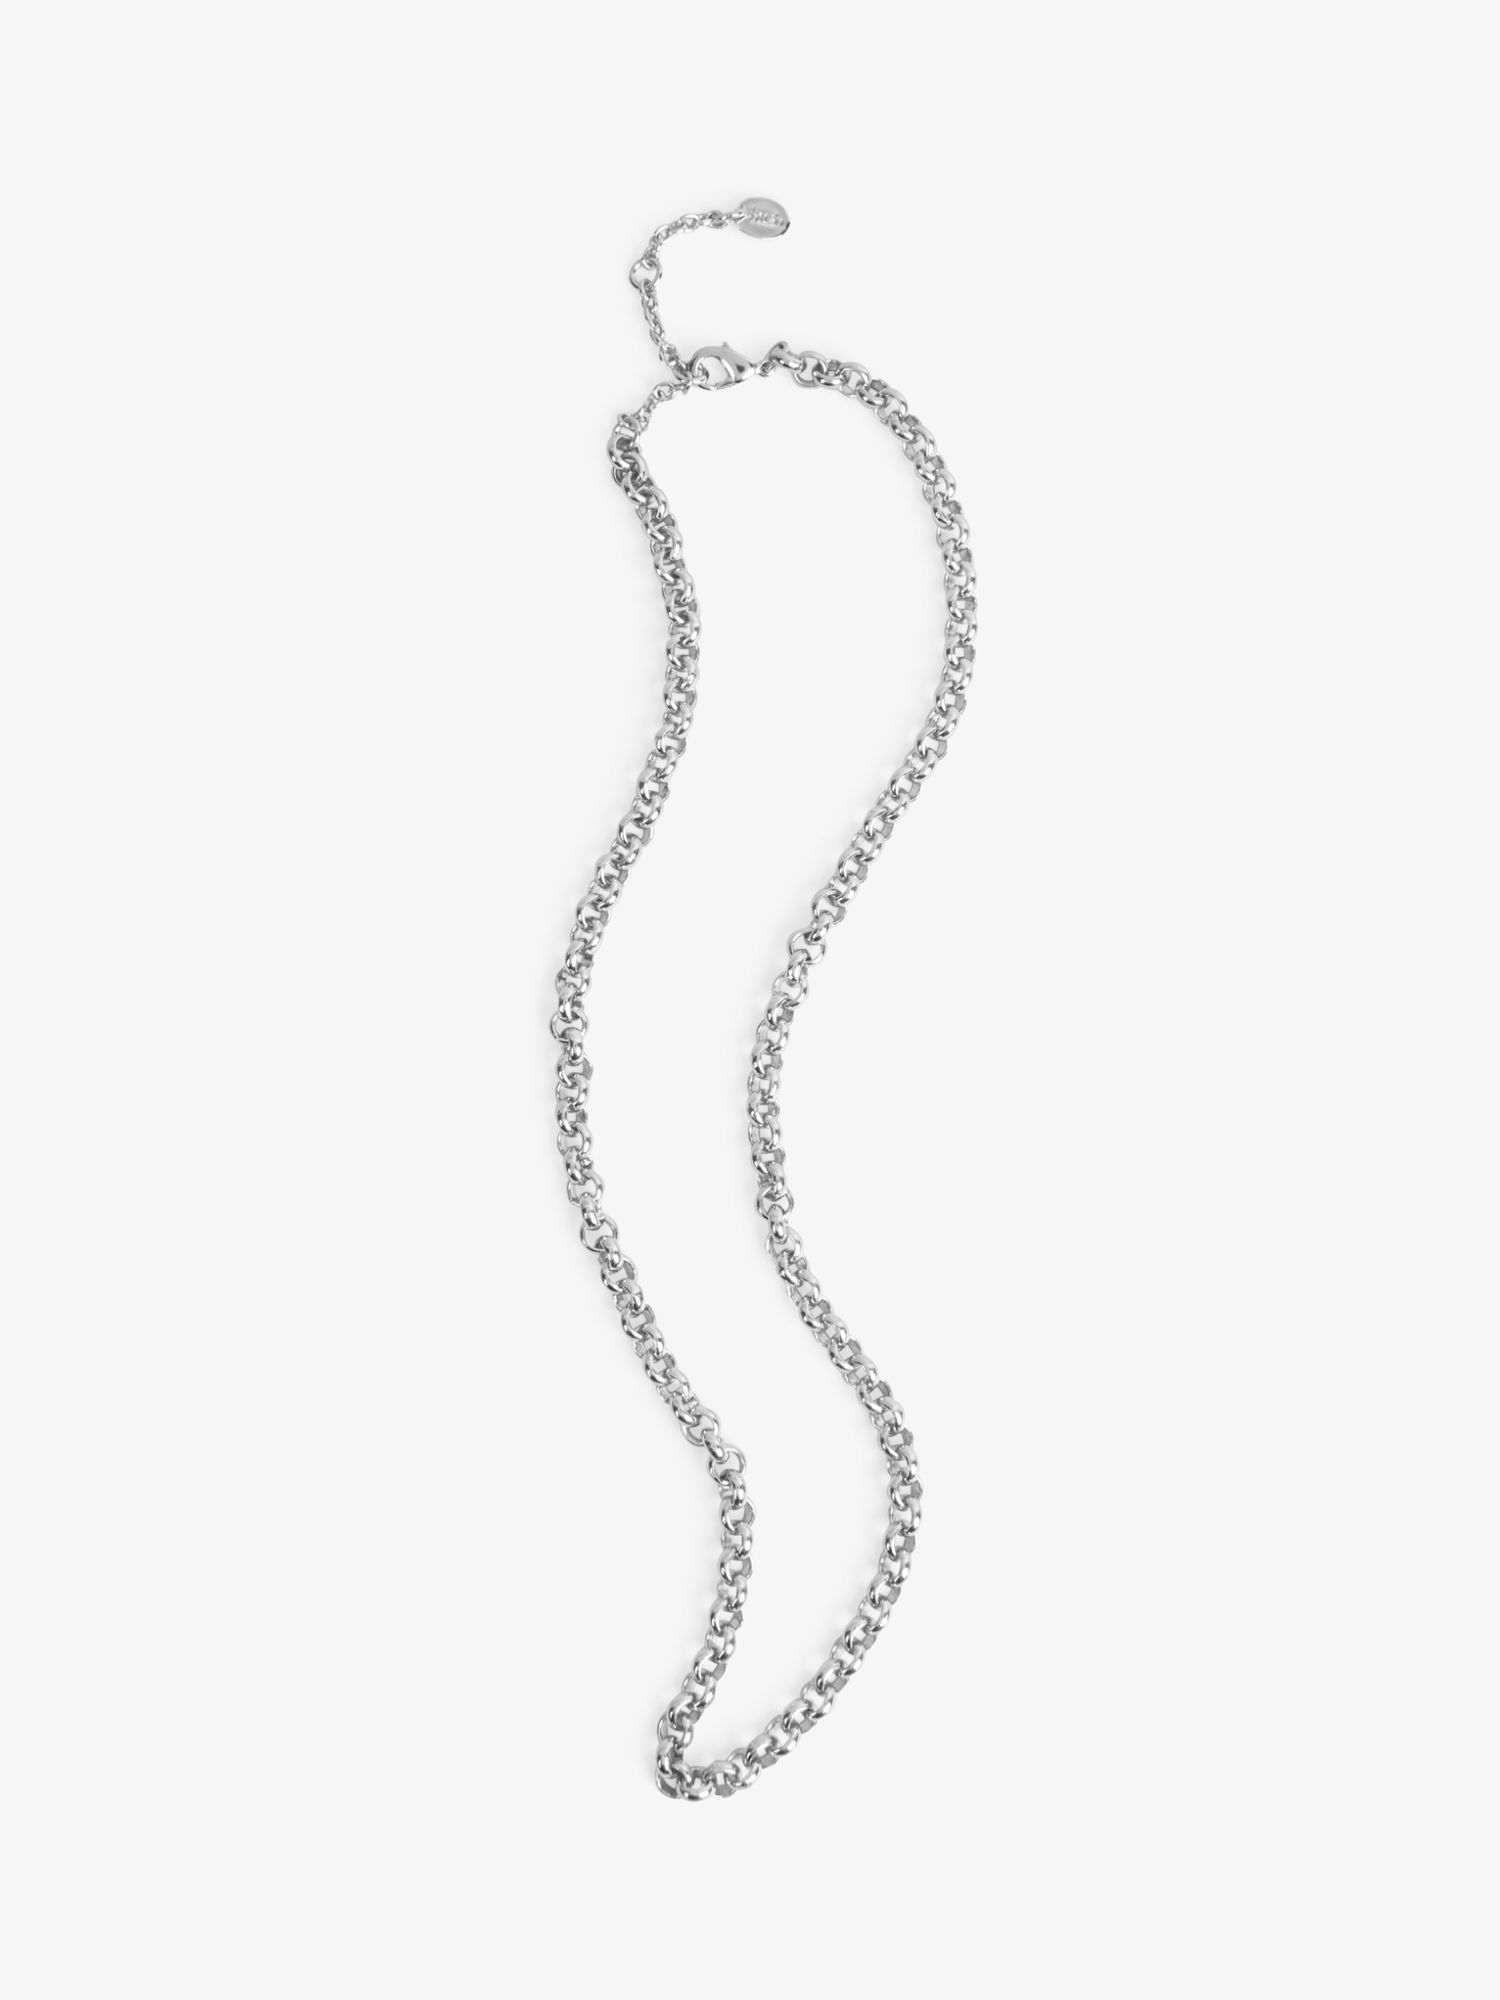 HUSH Maia Rolo Chain Necklace, Silver at John Lewis & Partners